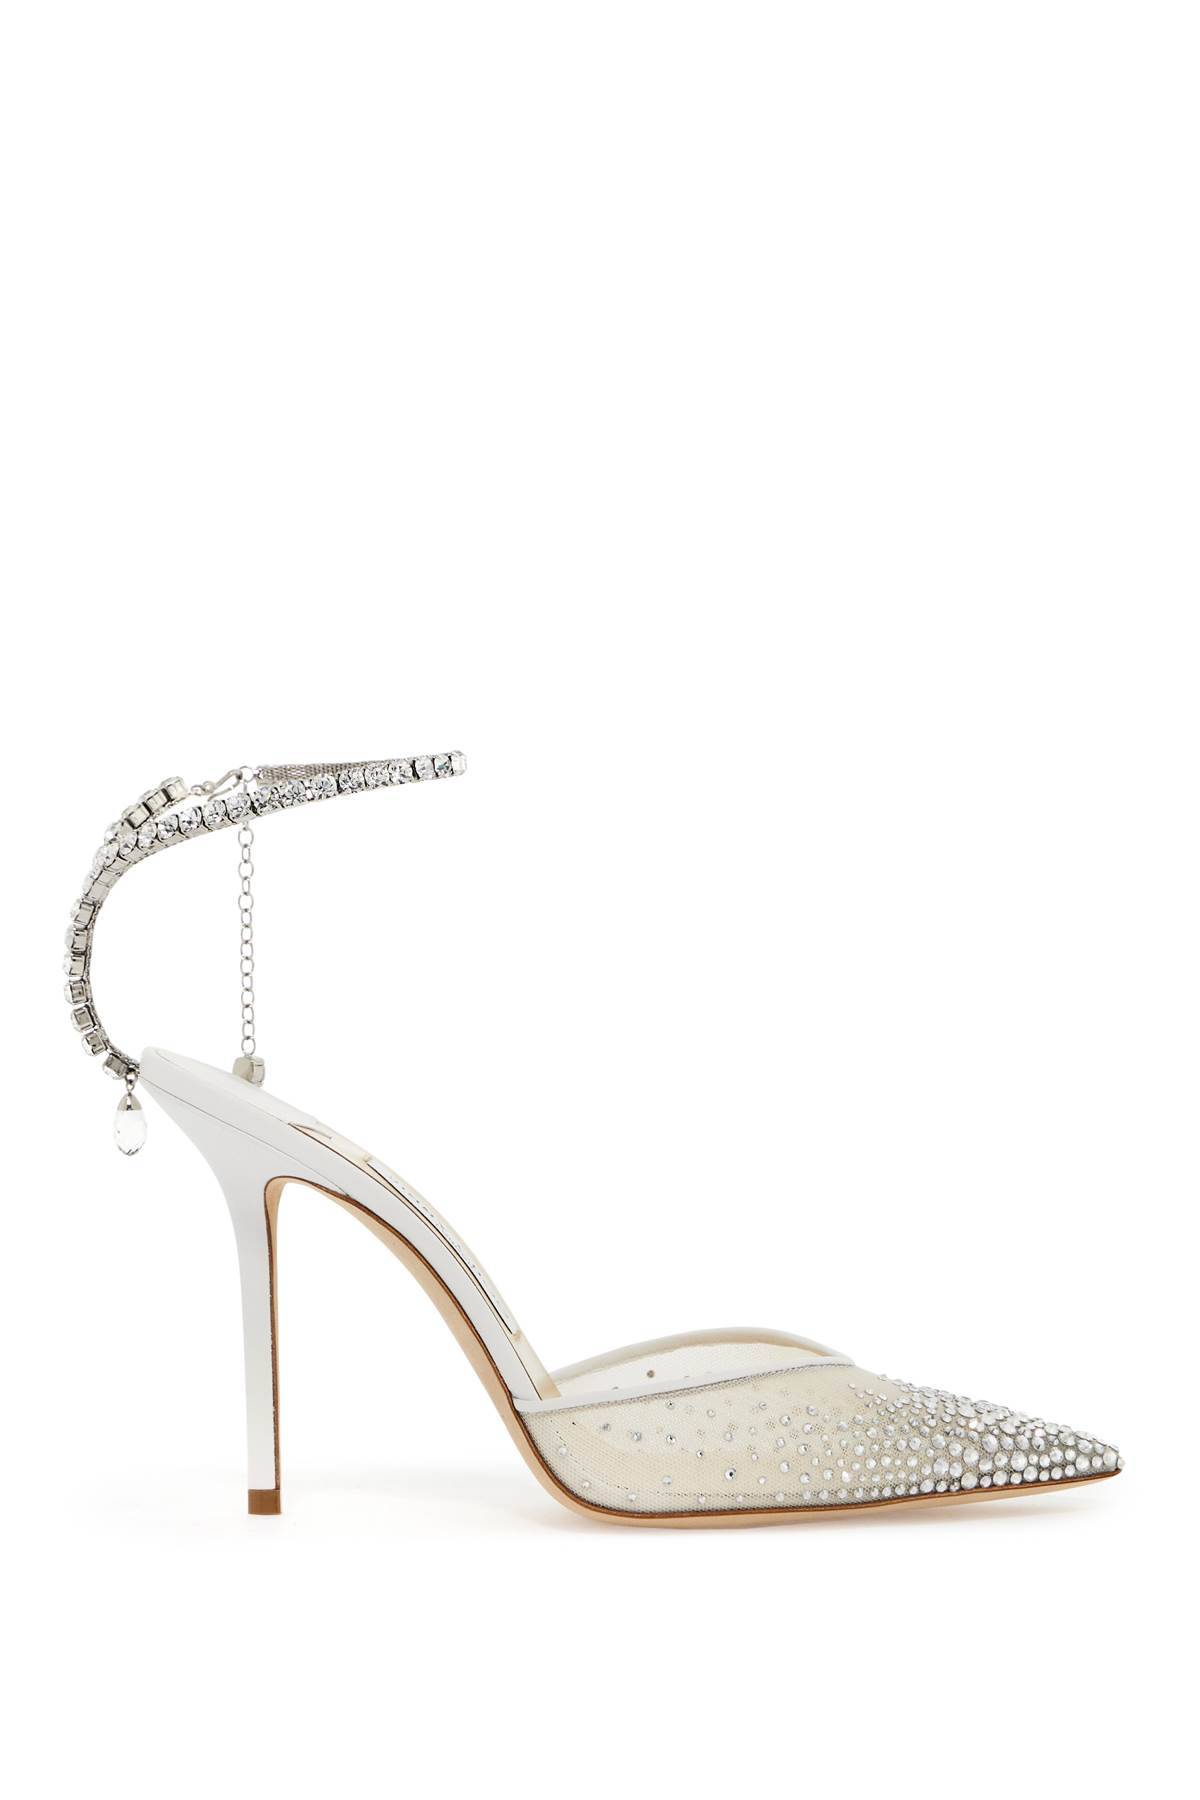 Jimmy Choo Saeda 100 Pumps With Crystals In White